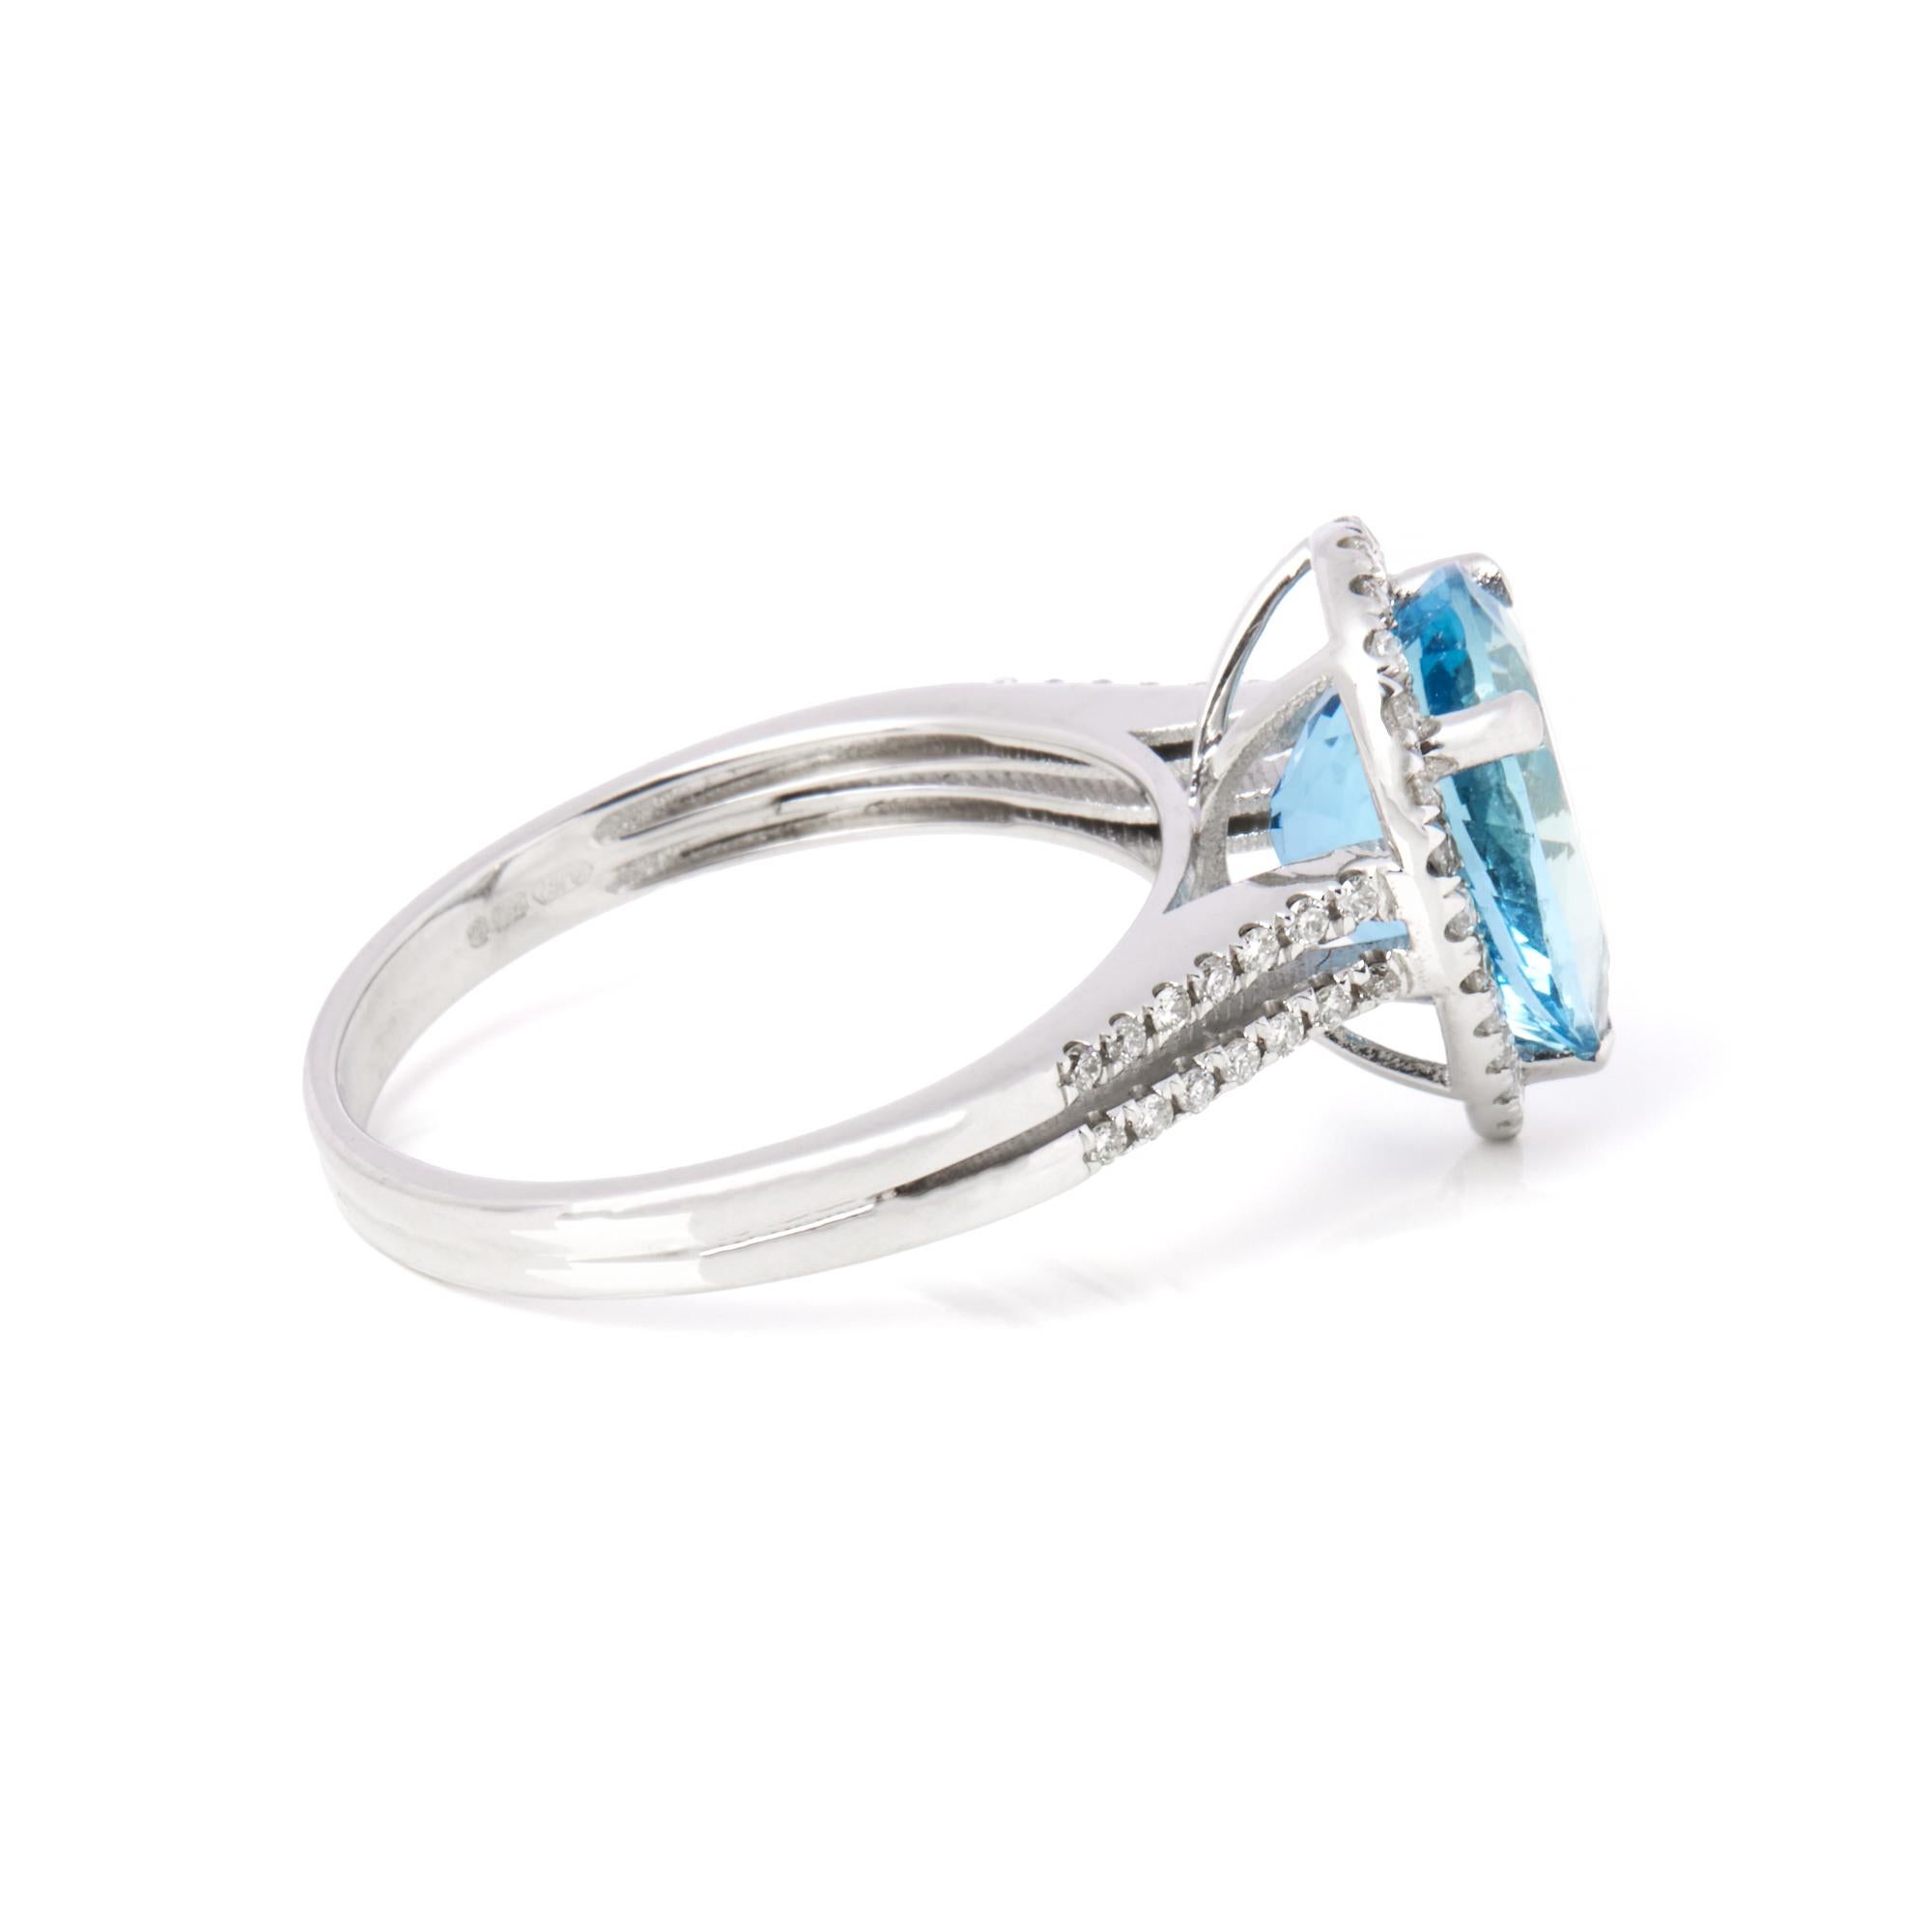 Contemporary David Jerome Certified 2.52ct Pear Cut Aquamarine and Diamond Ring For Sale